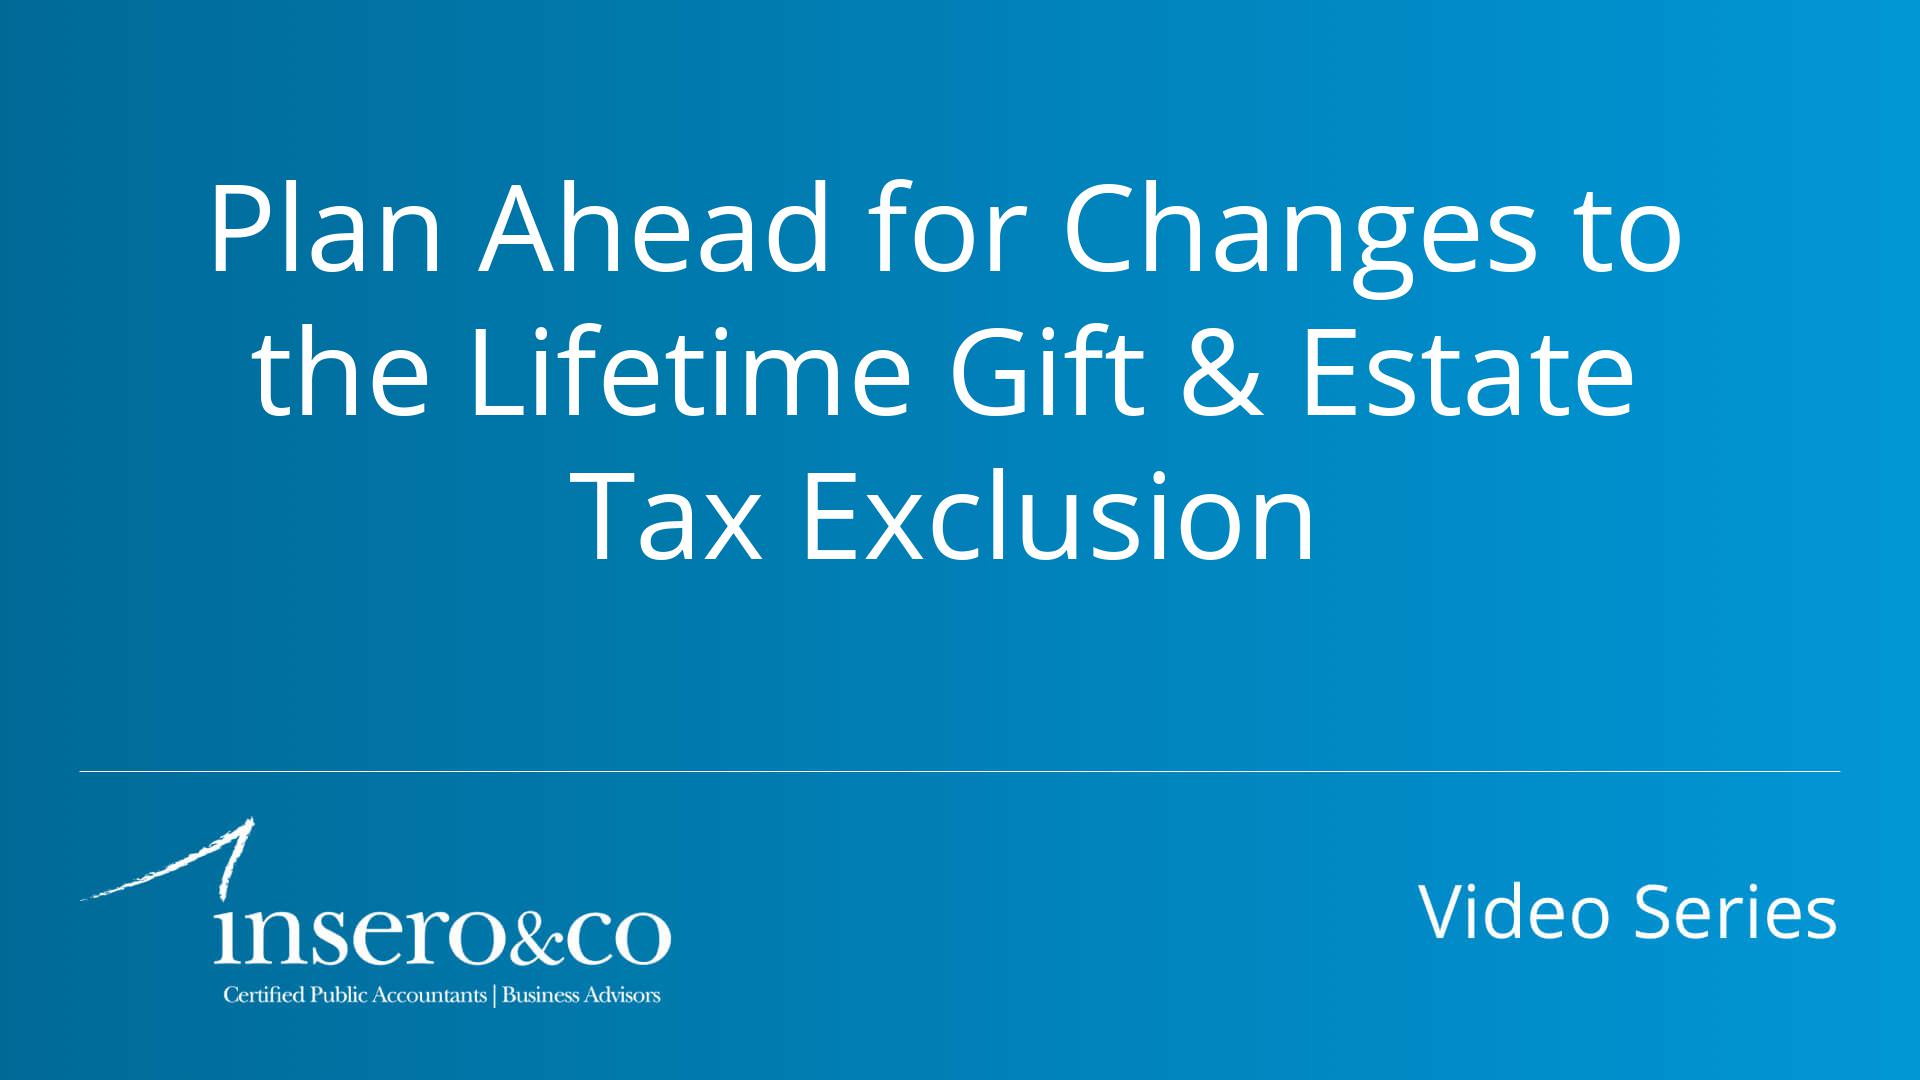 Plan Ahead for Changes to the Lifetime Gift & Estate Tax Exclusion